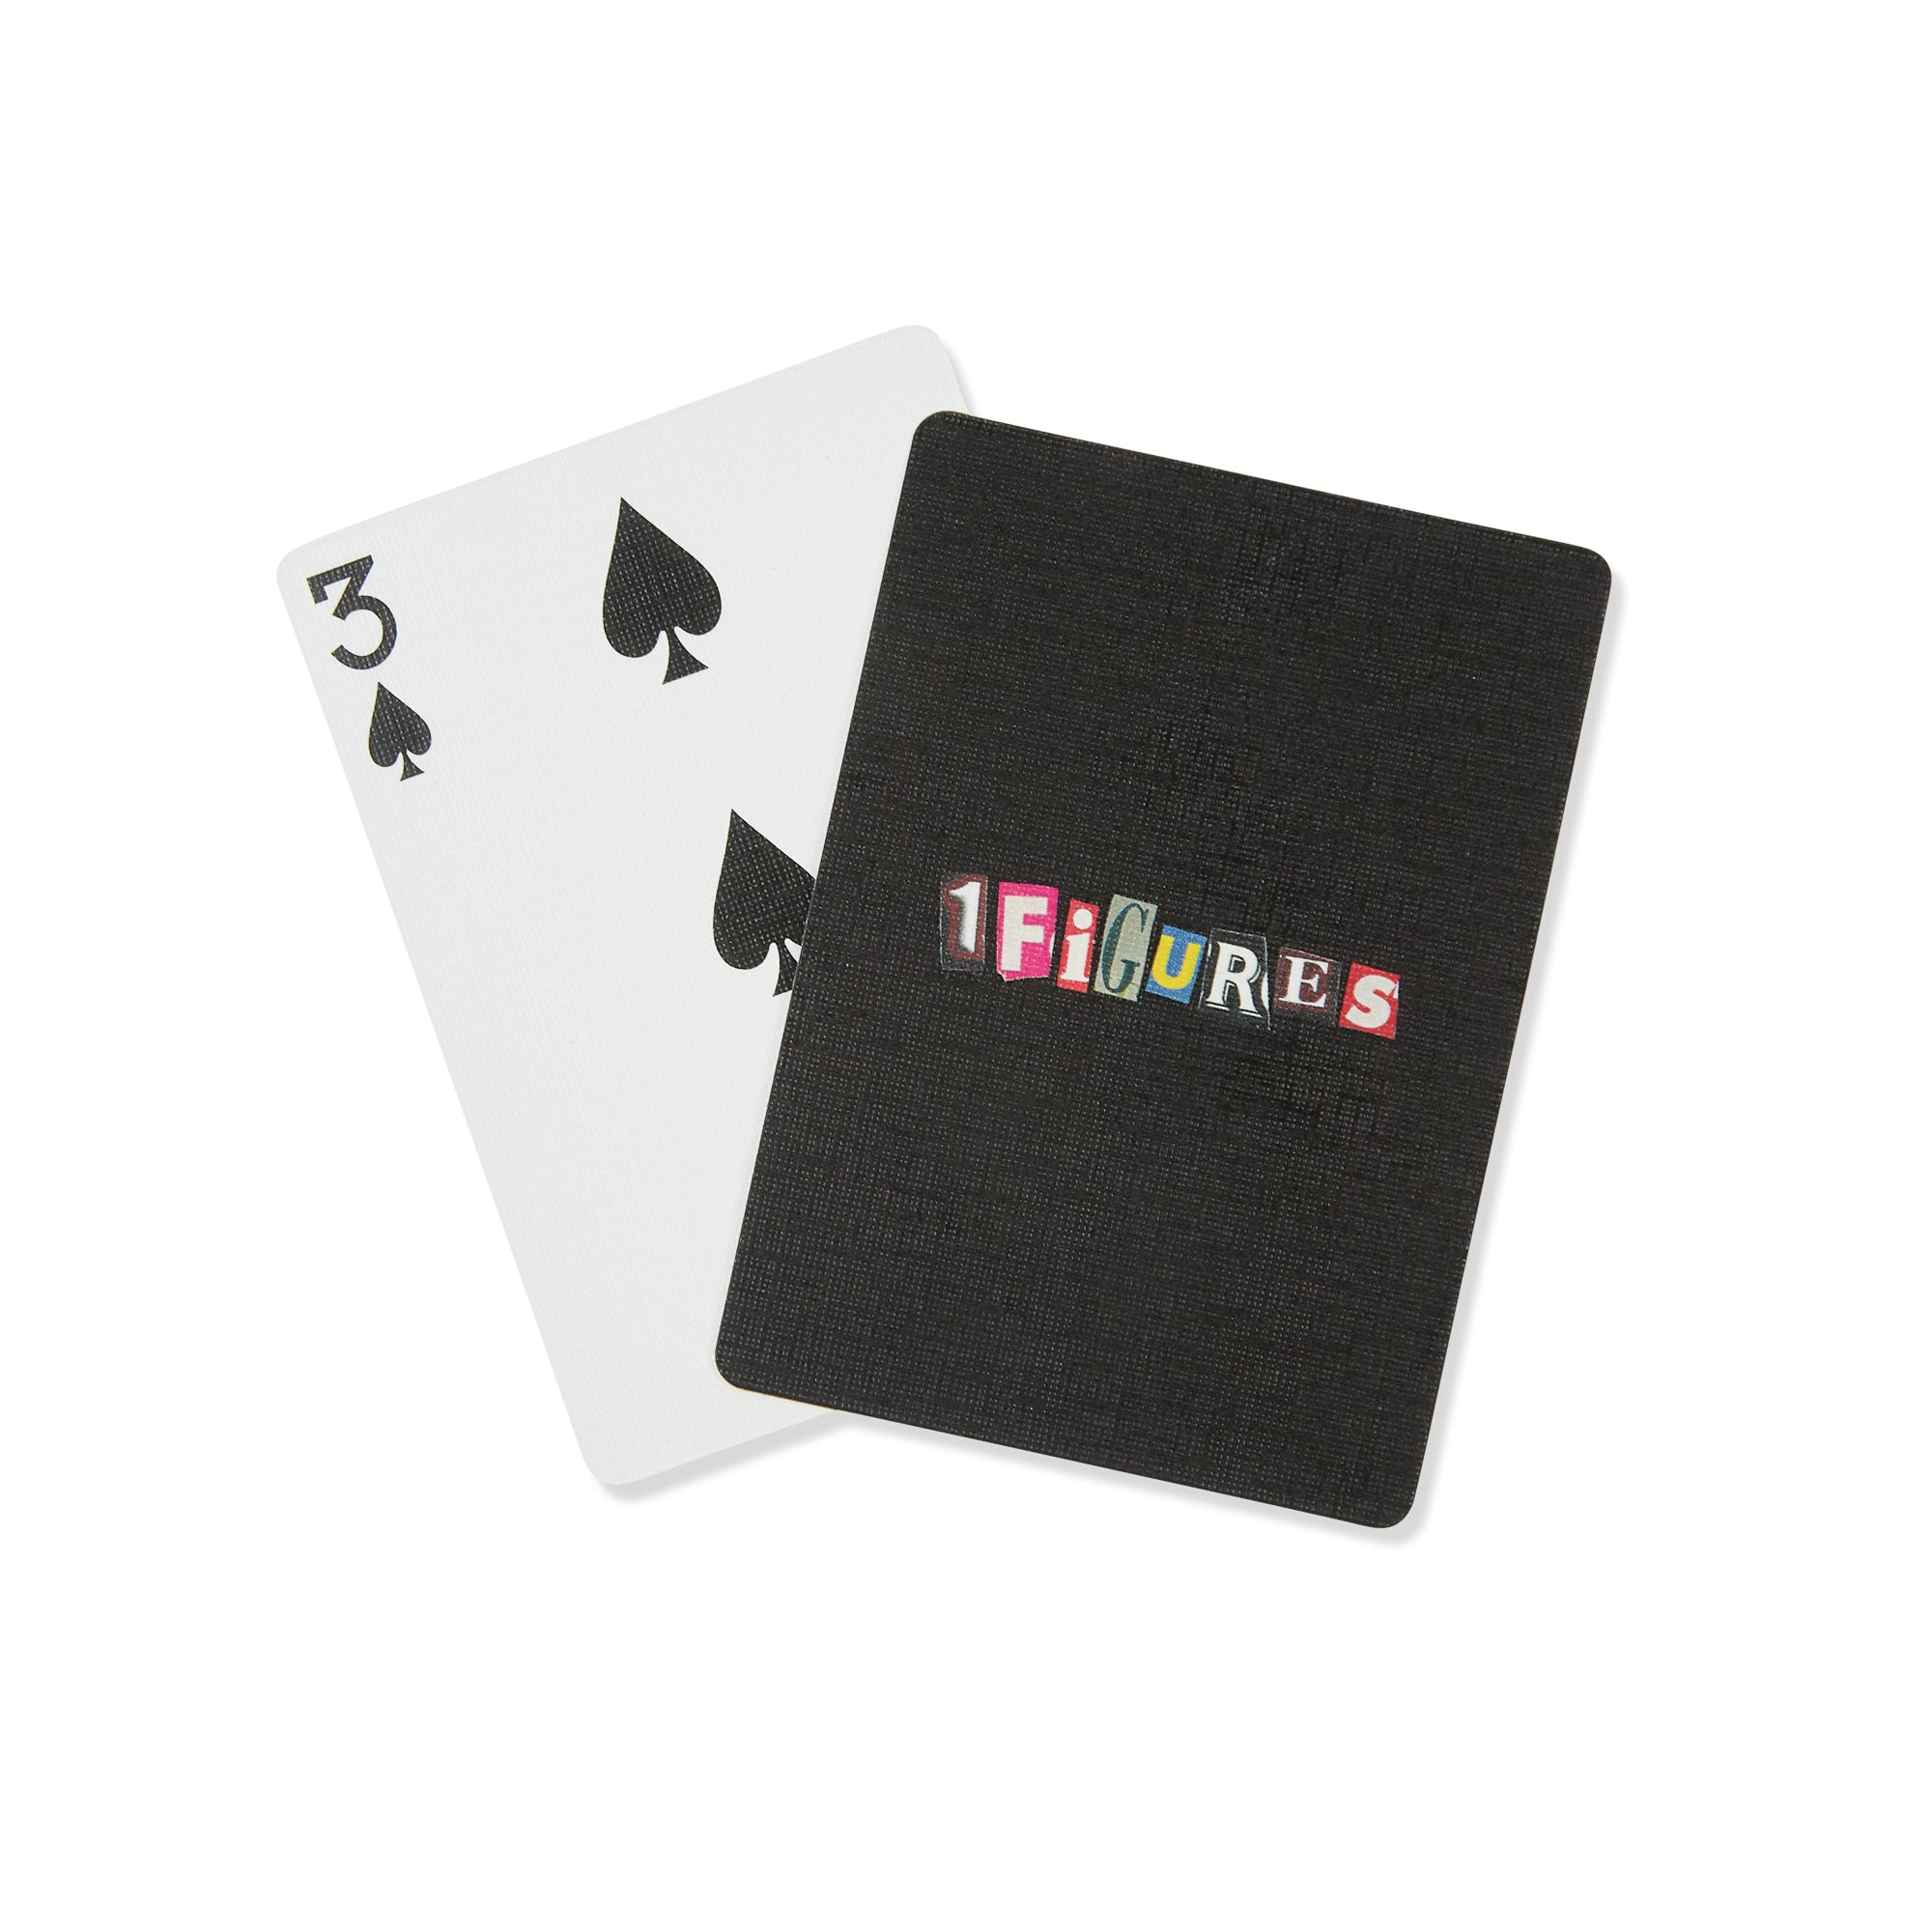 RANSOM PLAYING CARDS